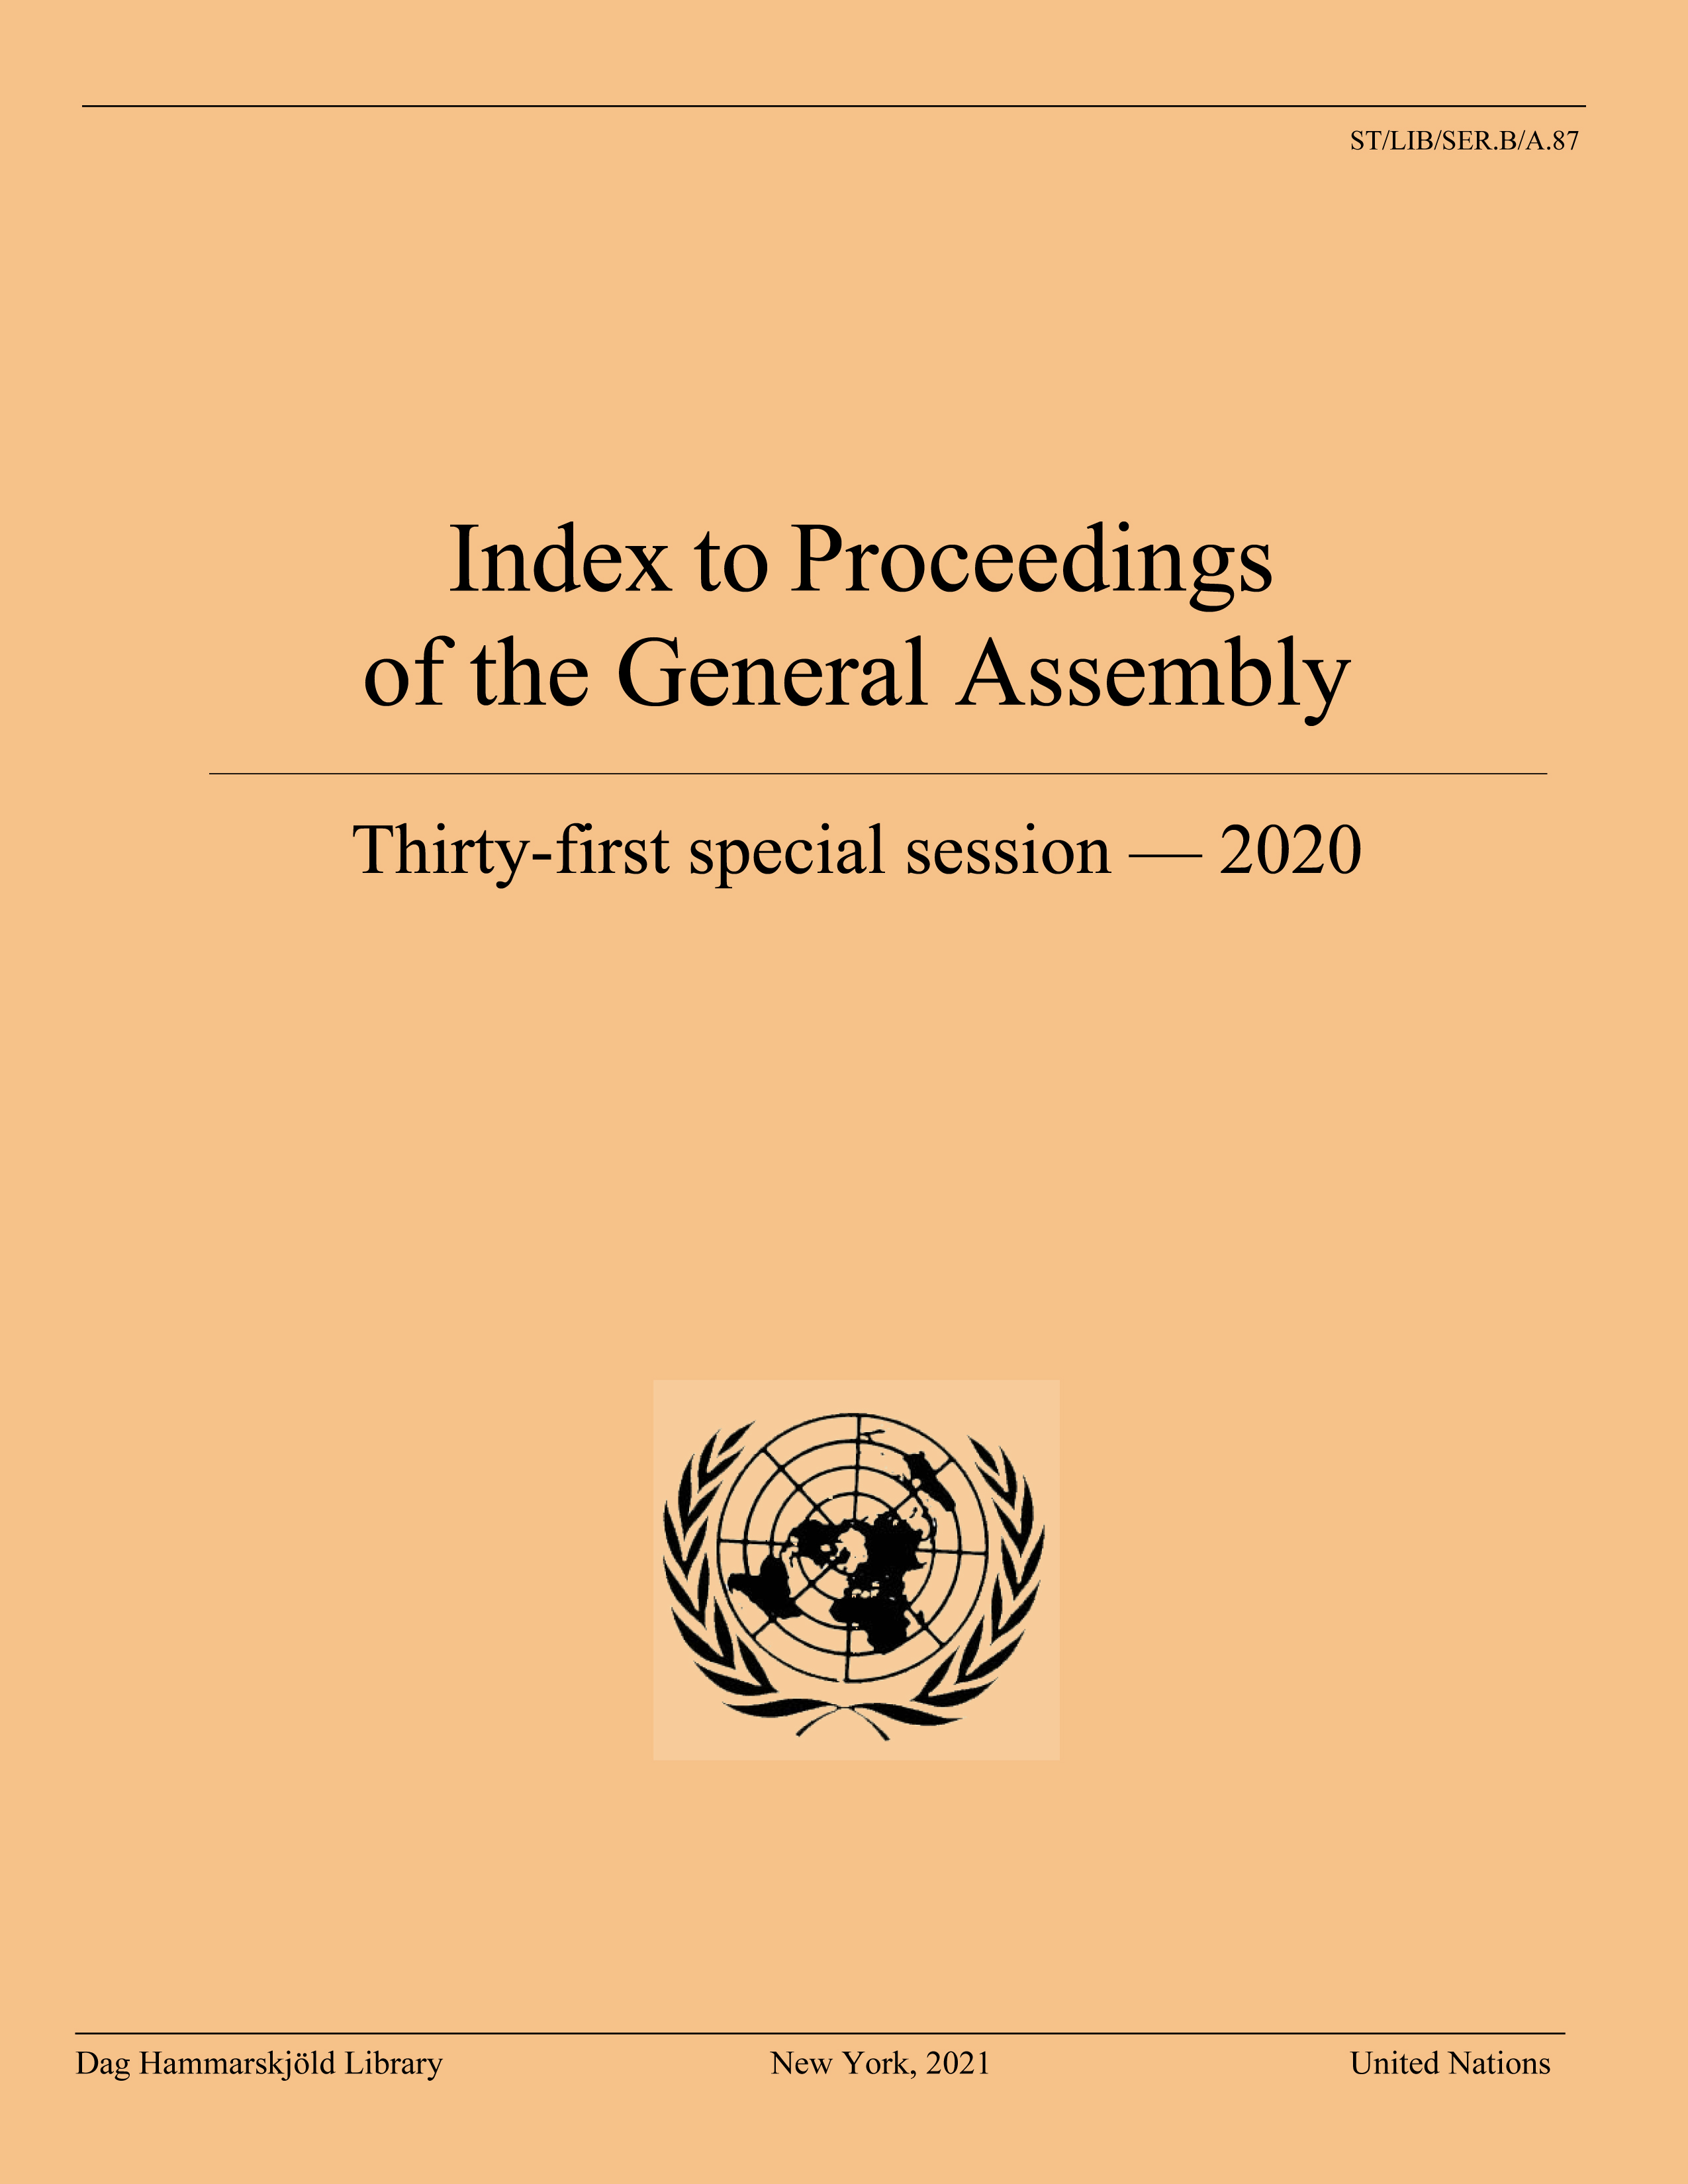 image of Index to Proceedings of the General Assembly 2020